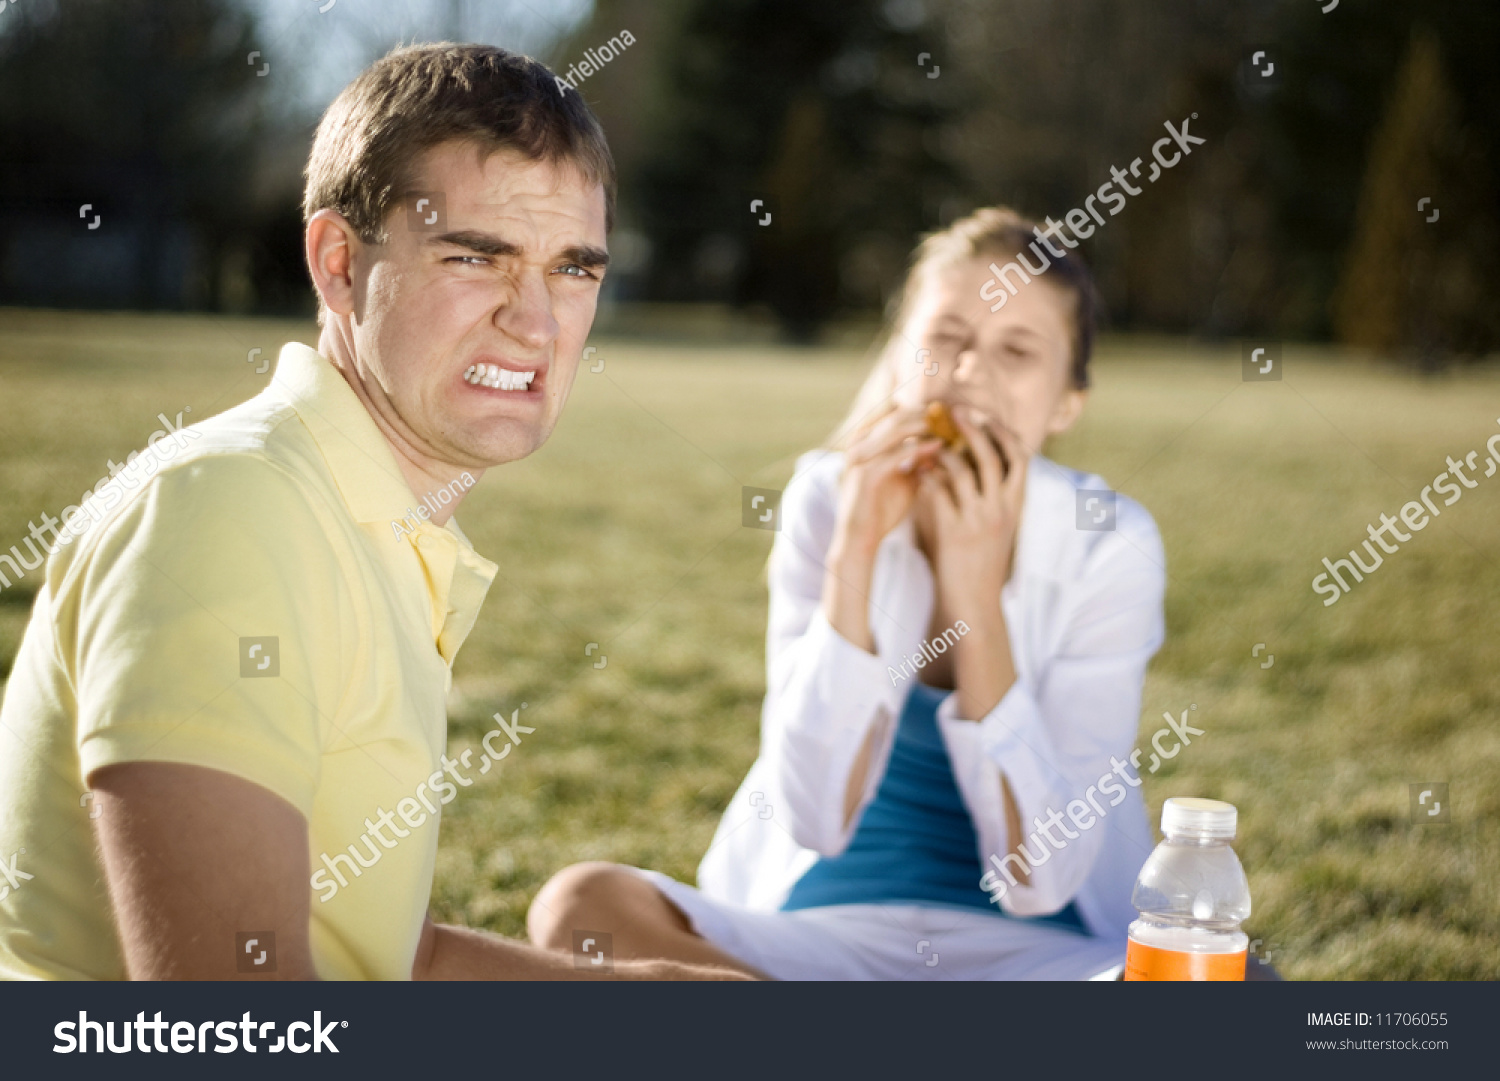 stock-photo-a-guy-cringing-as-his-date-stuff-her-face-with-food-11706055.jpg